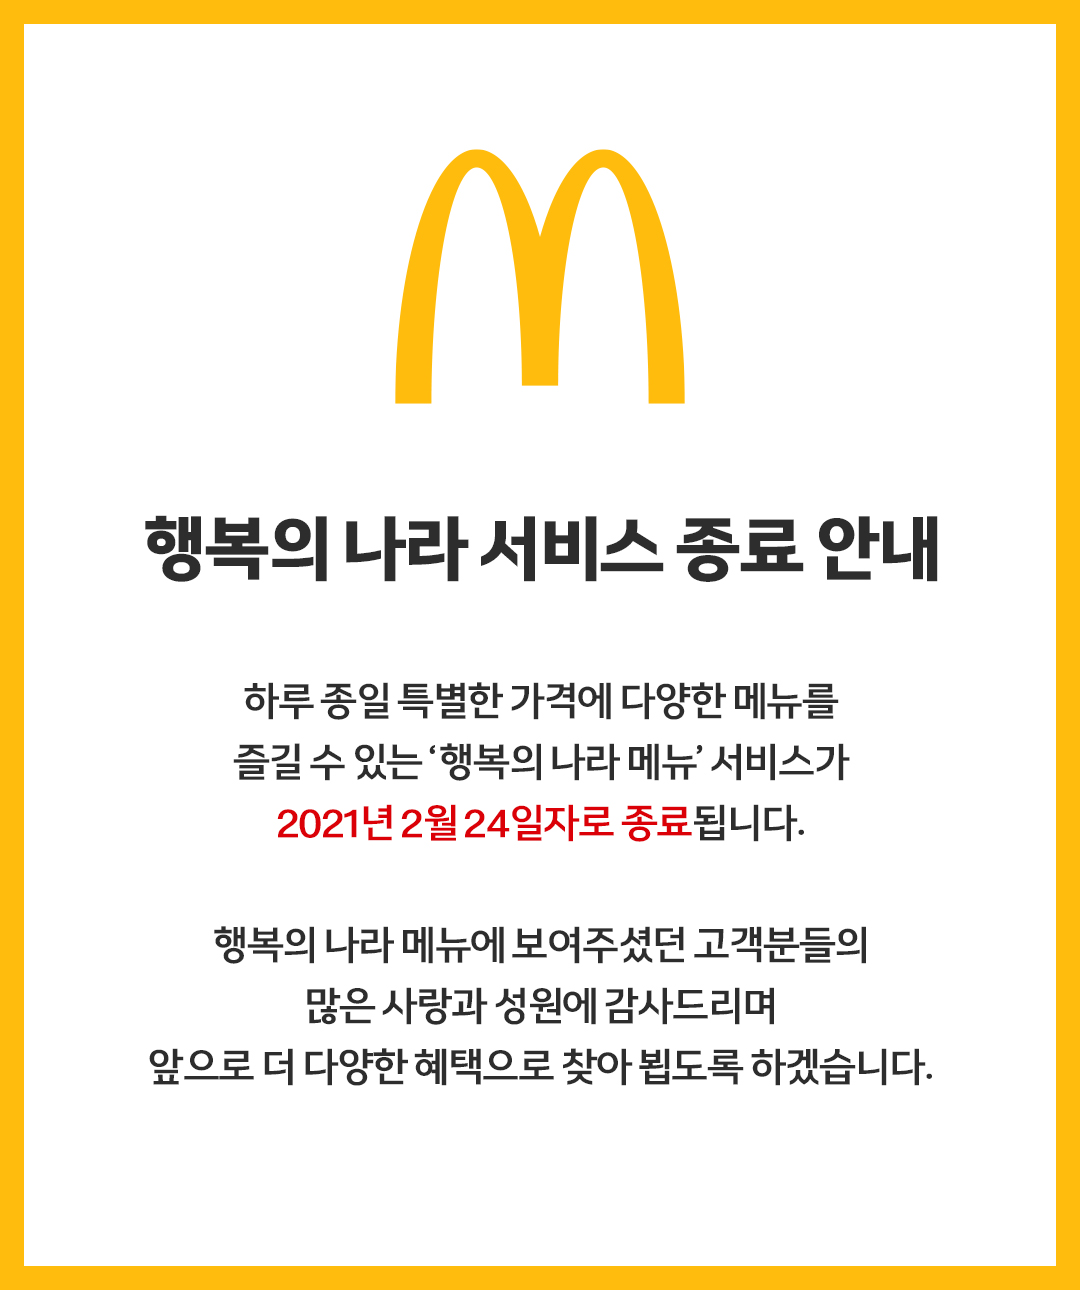 Why McDonald's is making a McLaunch announcement.